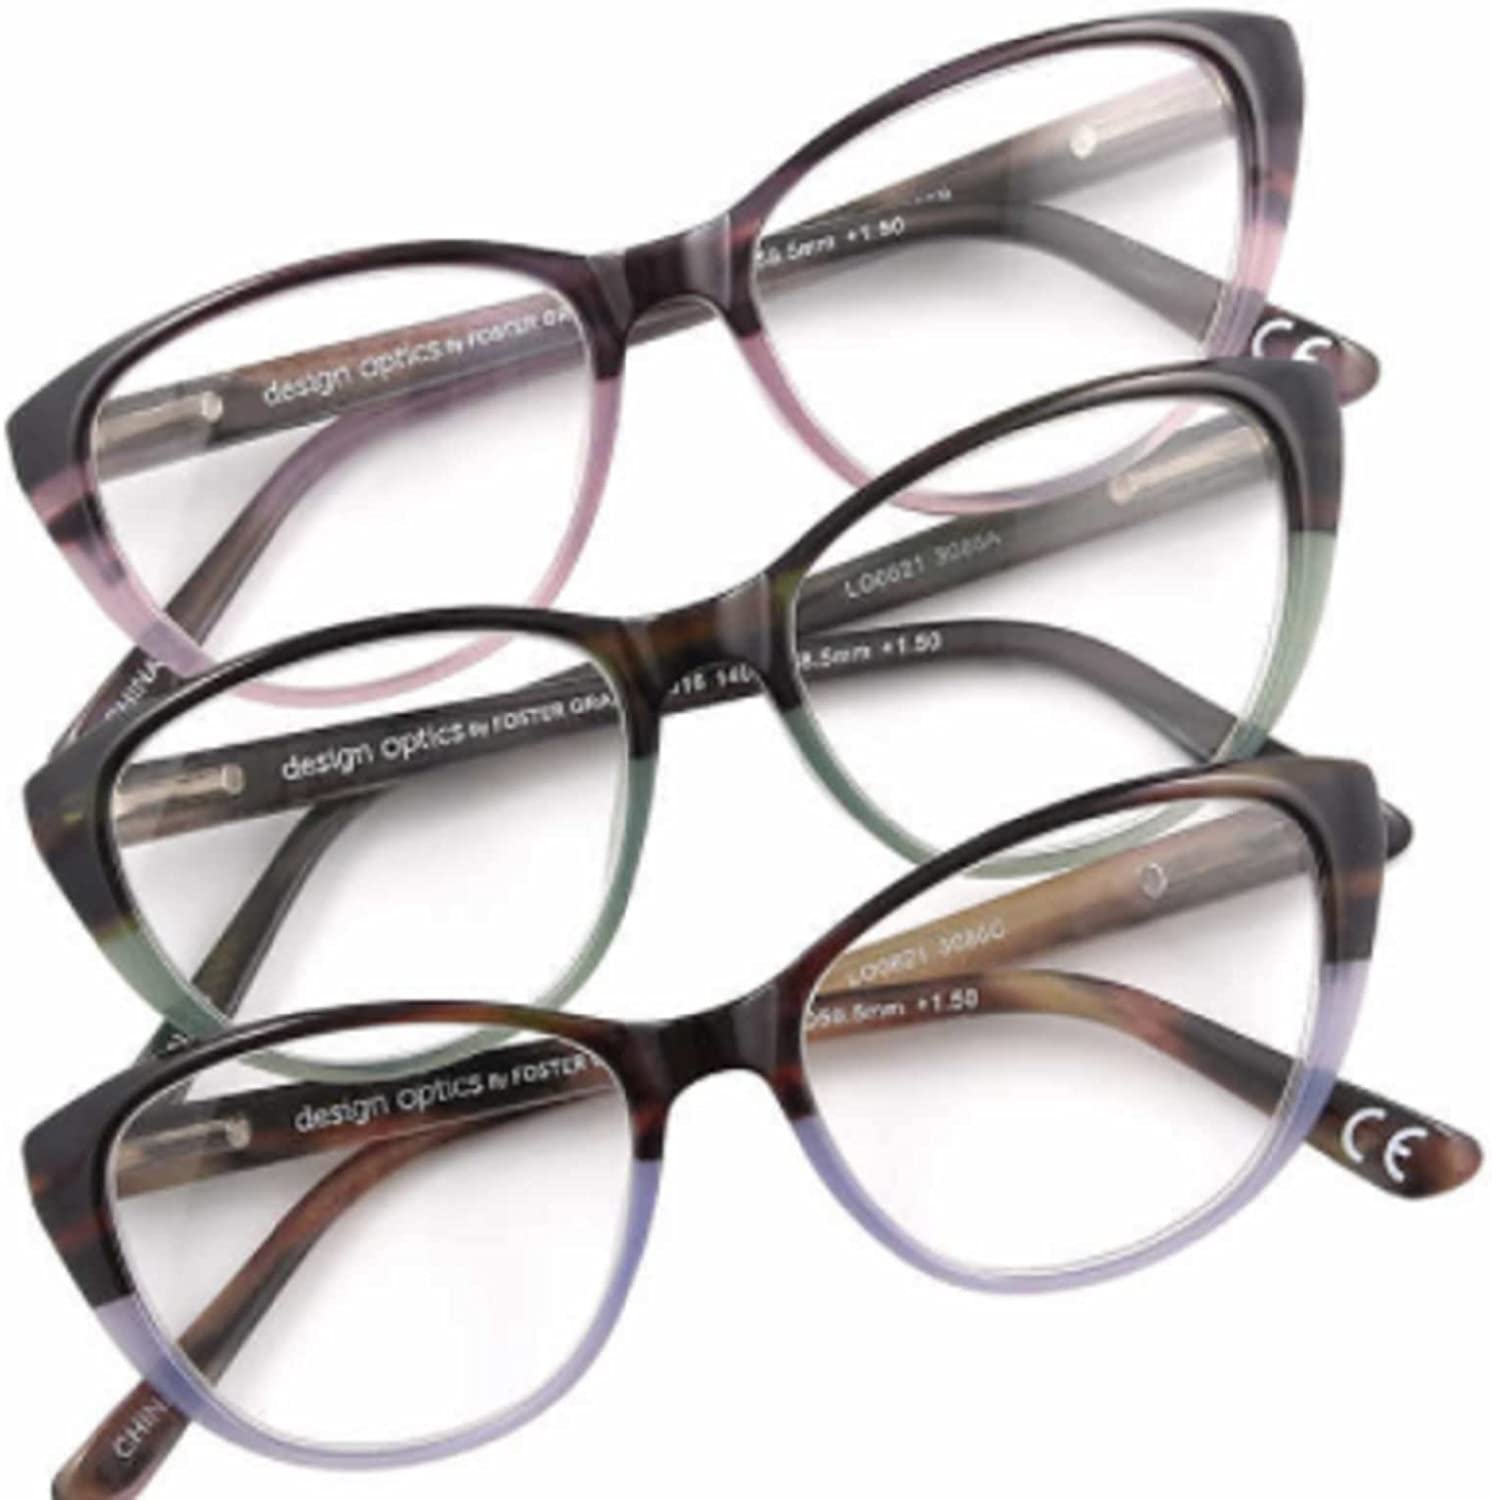 10 Assorted Branded Reading Glasses with 5 Cases - Perfect for Everyday Use